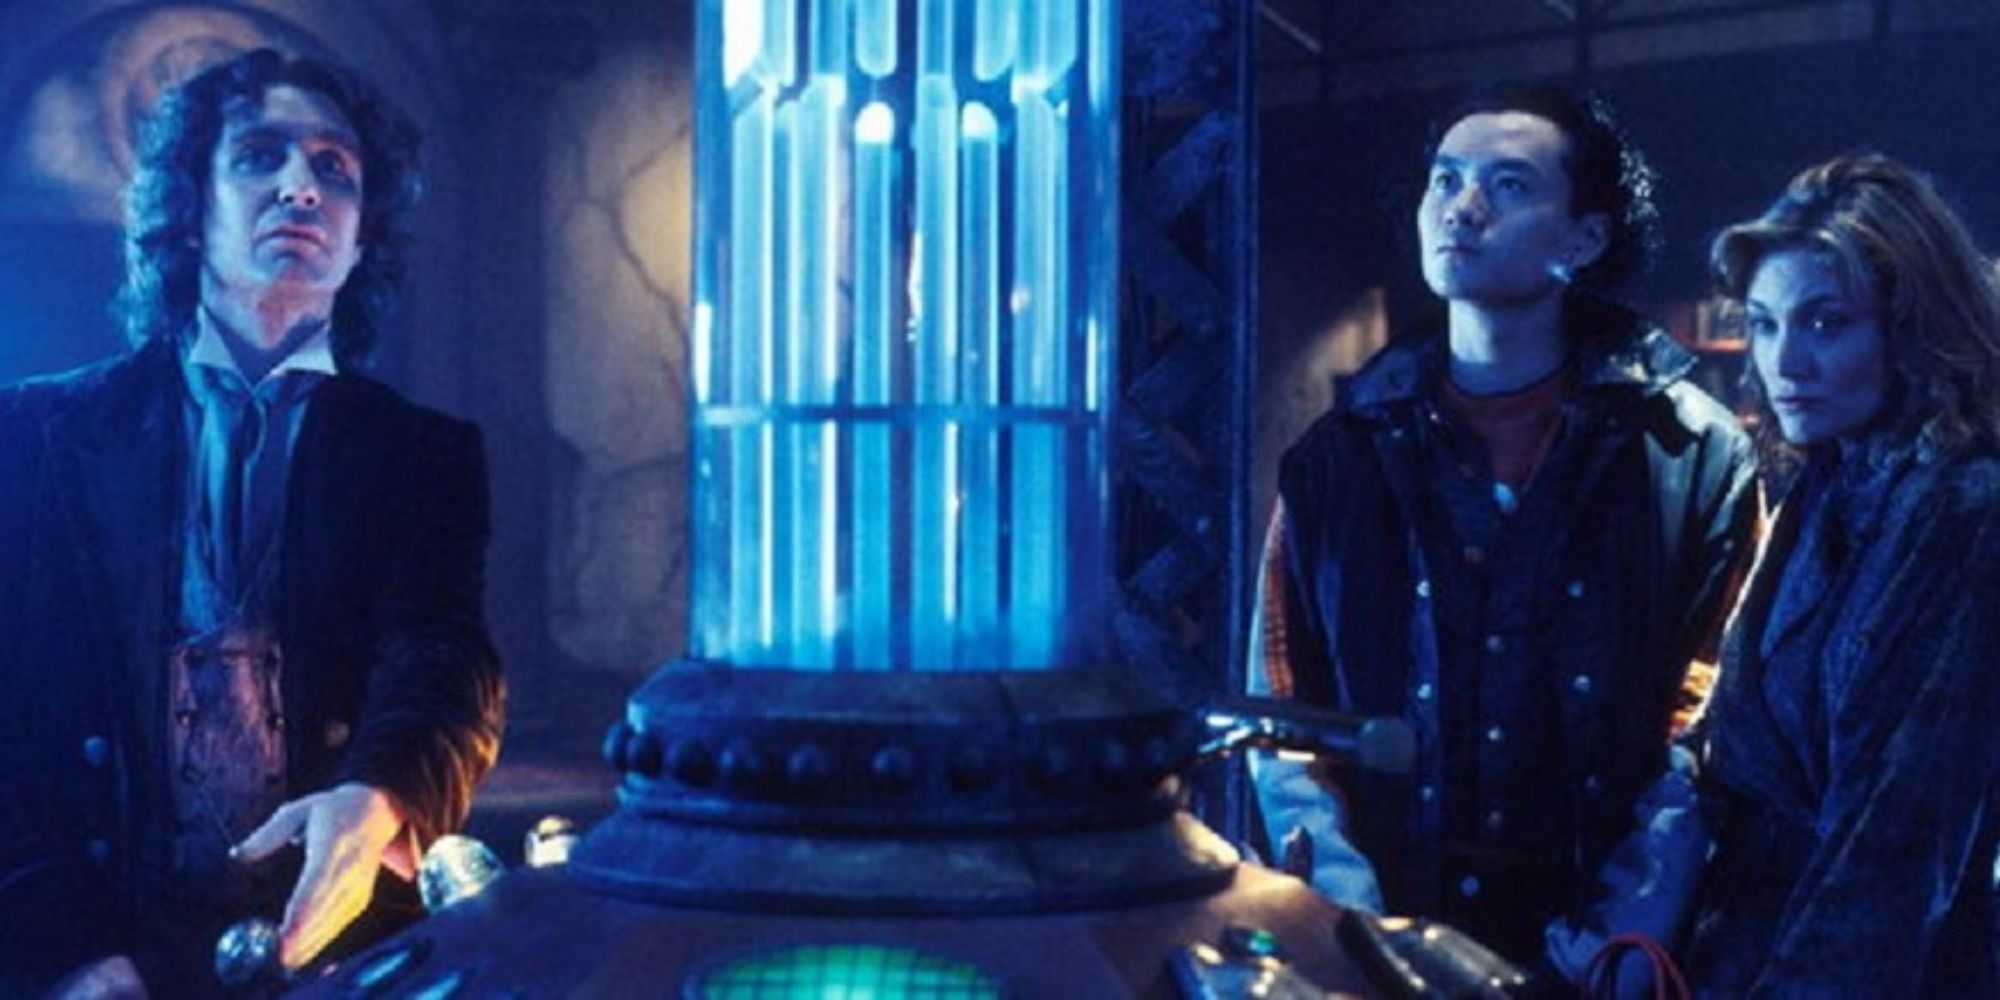 Promotional image of the TV movie The Enemy Within, a movie from the TV show Doctor Who.